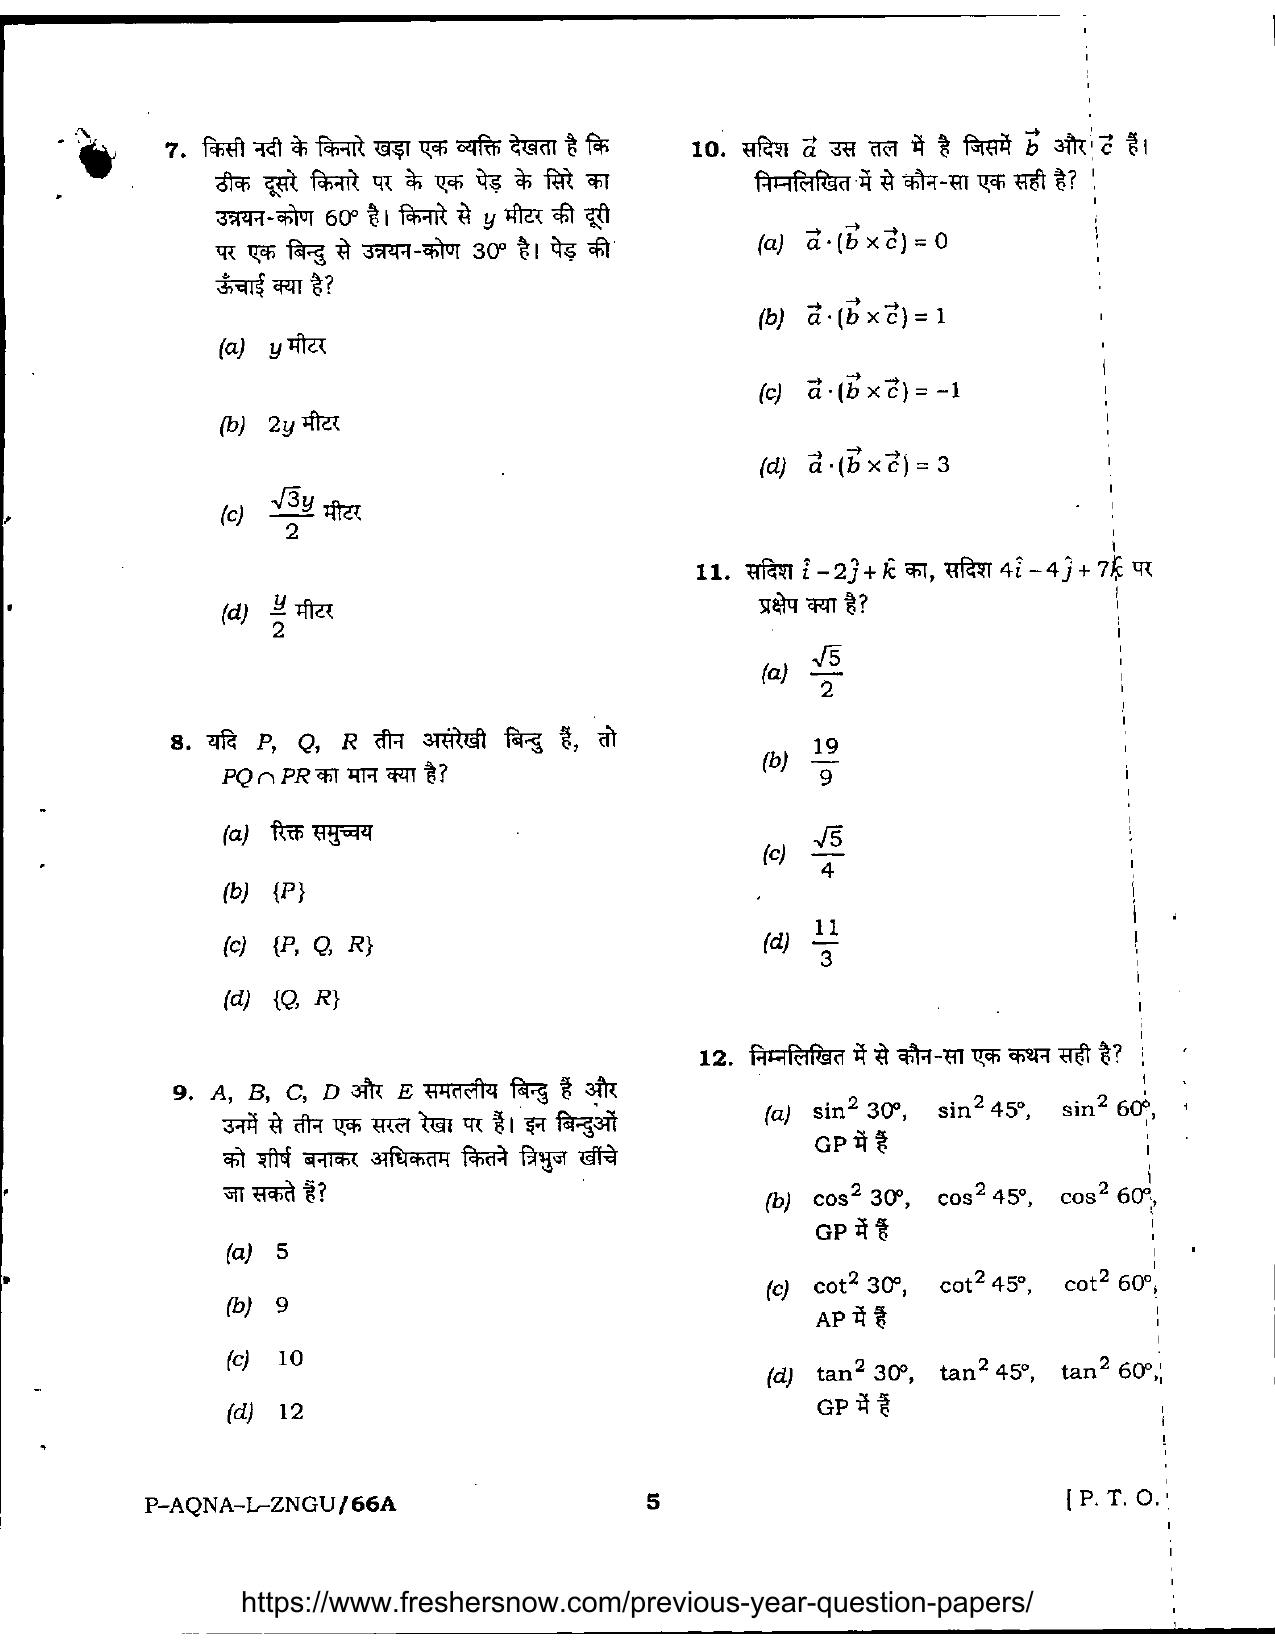 Jammu Kashmir Accounts Assistant Previous Papers for Mathematics - Page 5